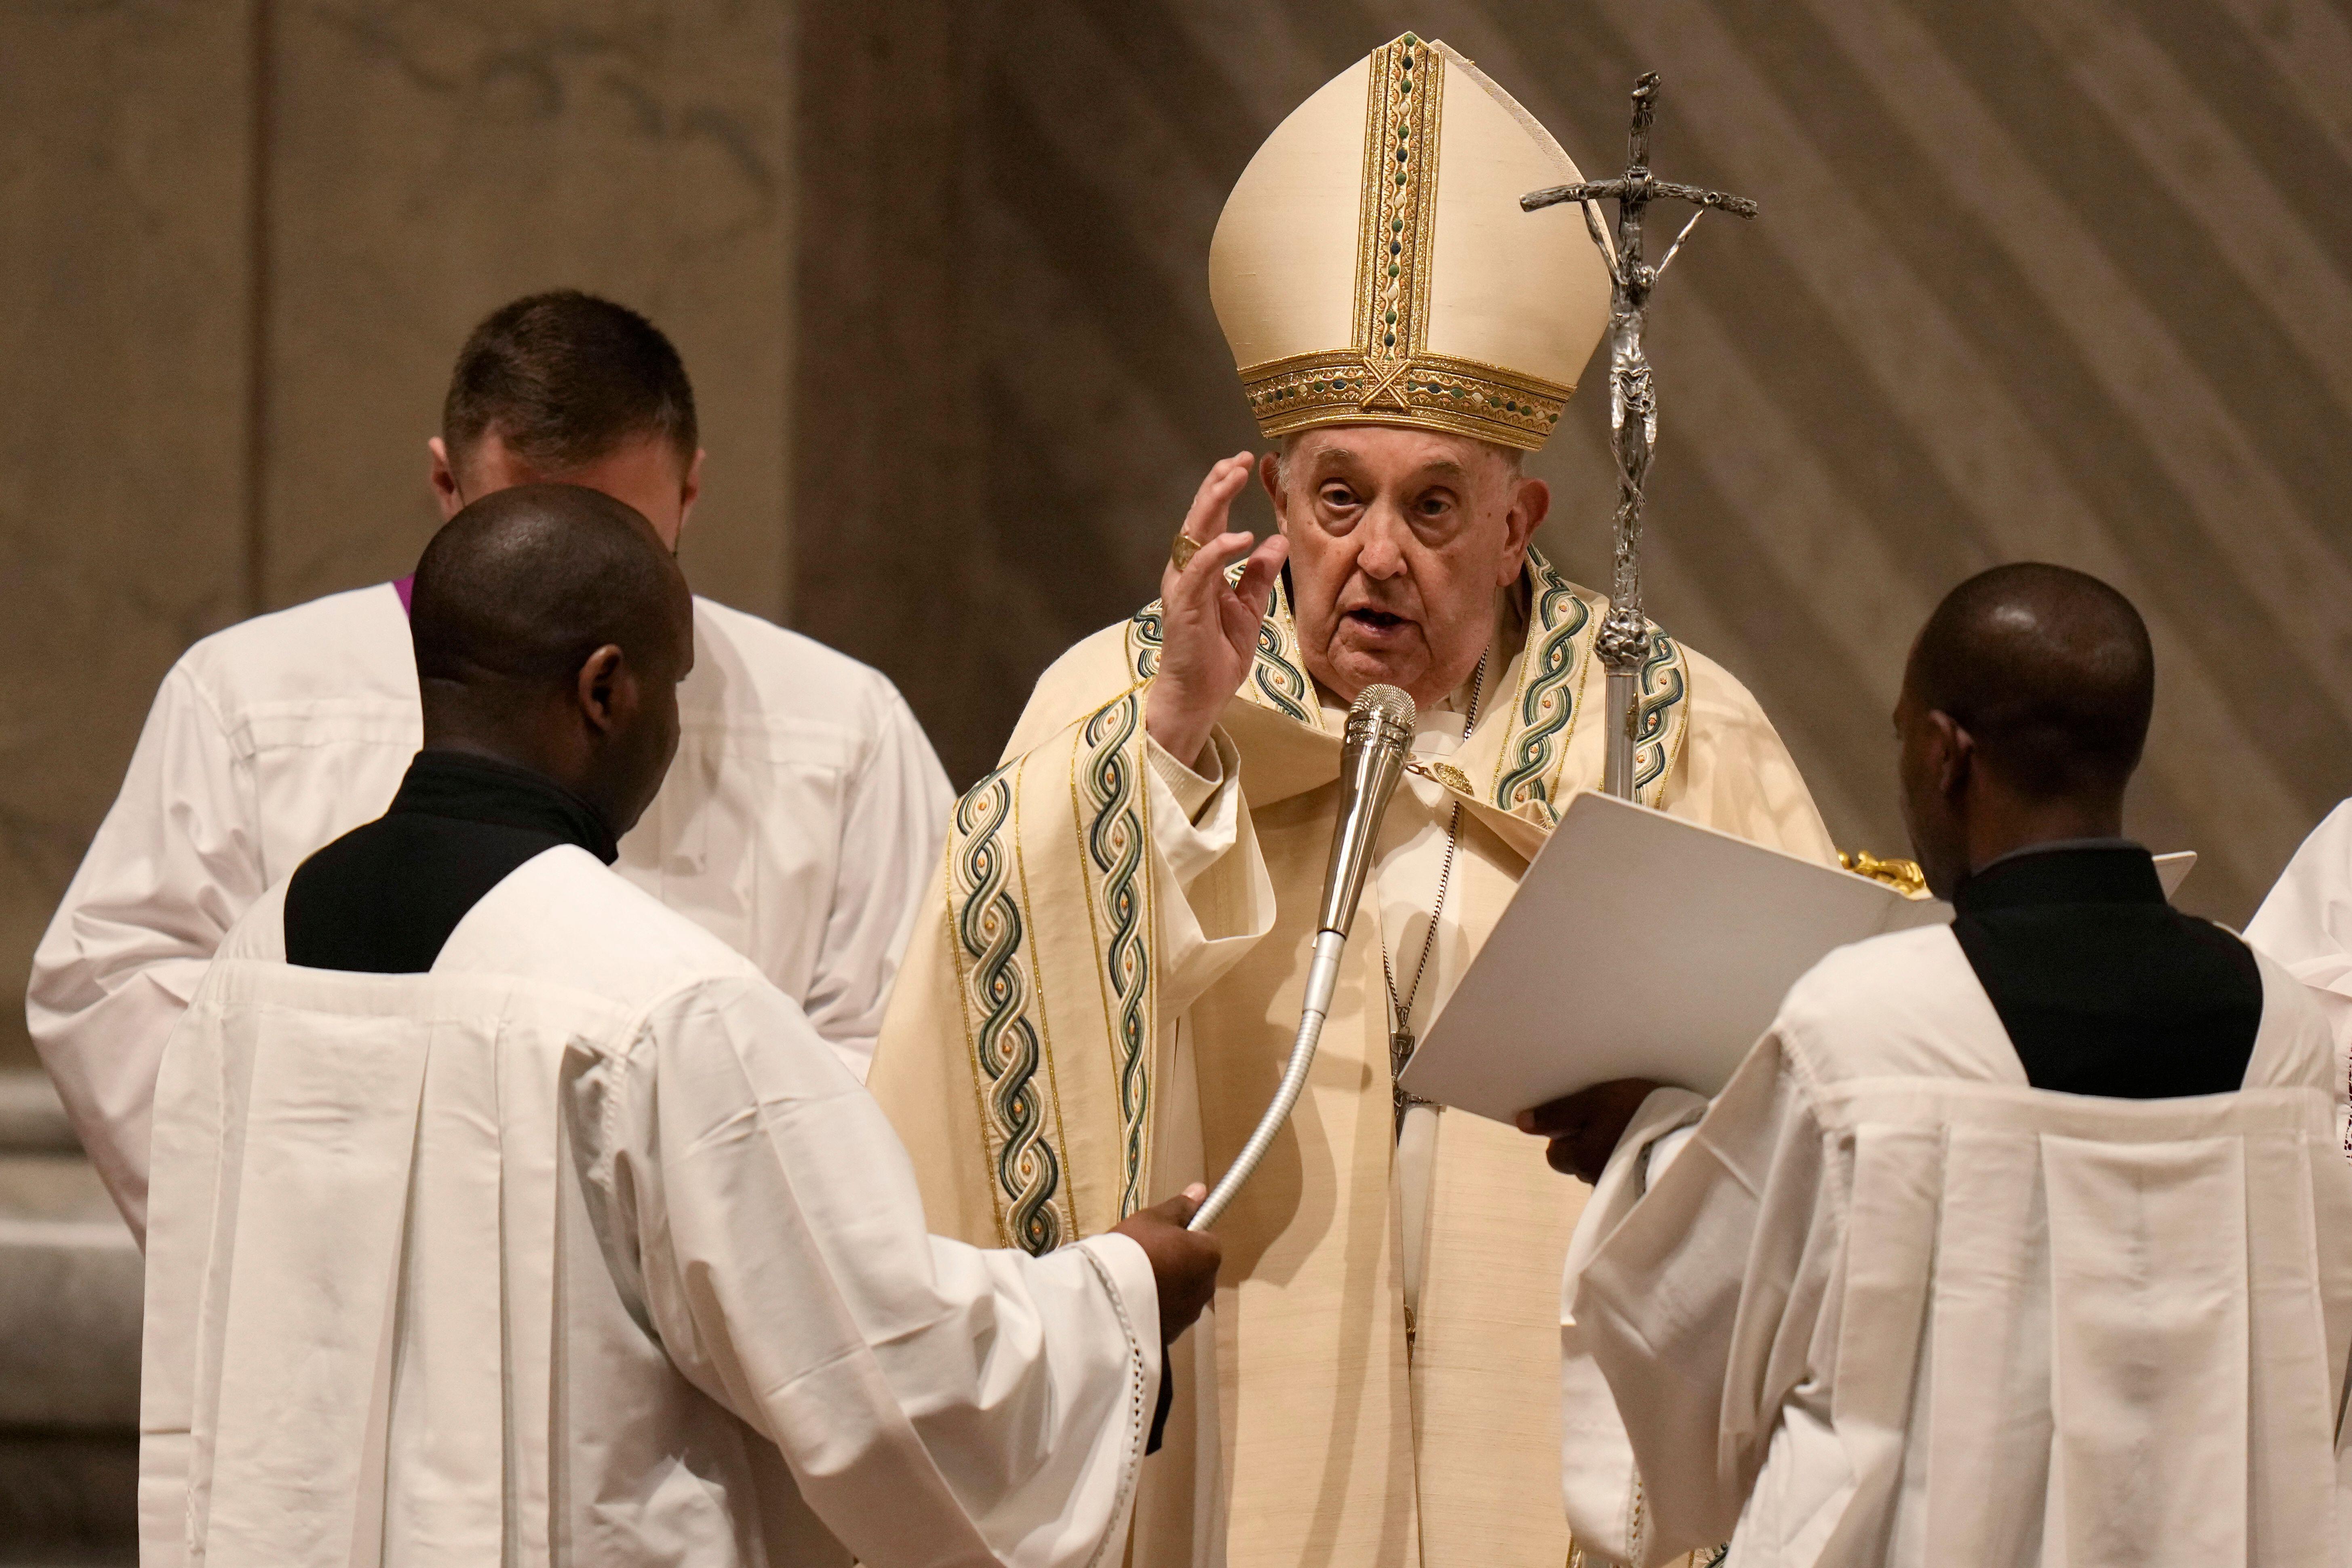  Pope Francis at Easter Vigil: Christ ‘is the one who brings us from darkness into light’